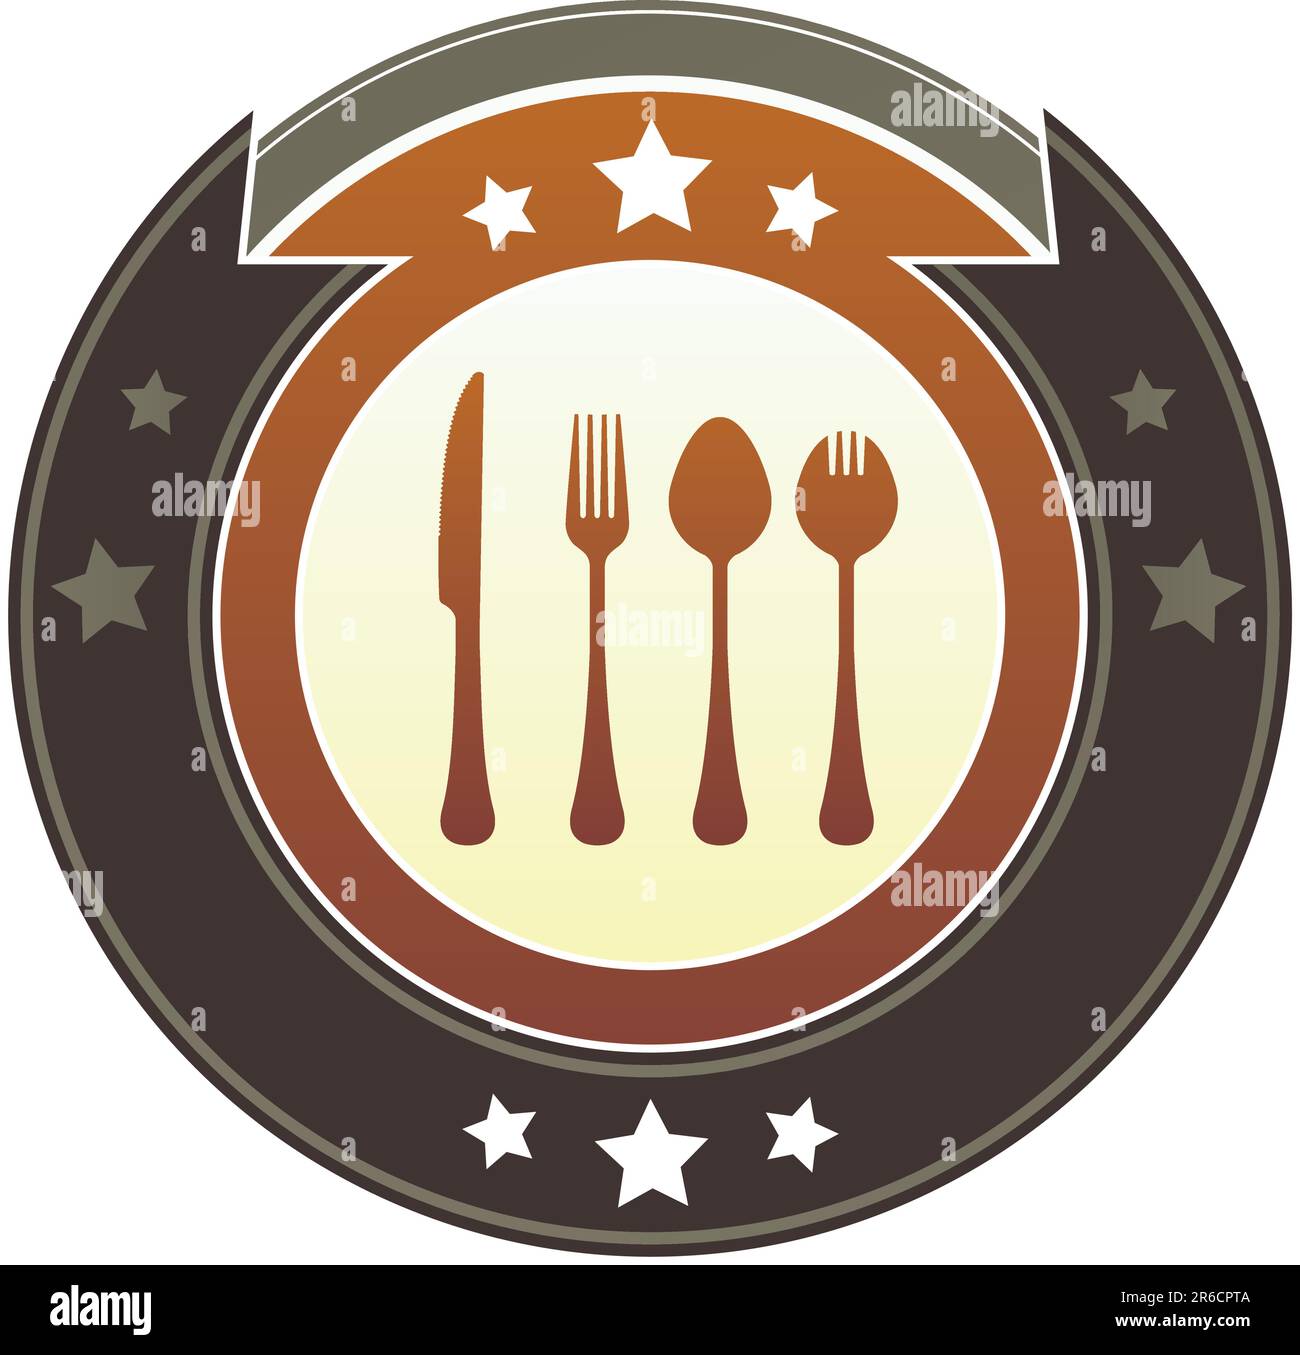 Eating utensils or dining icon on round red and brown imperial vector button with star accents suitable for use on website, in print and promotiona... Stock Vector